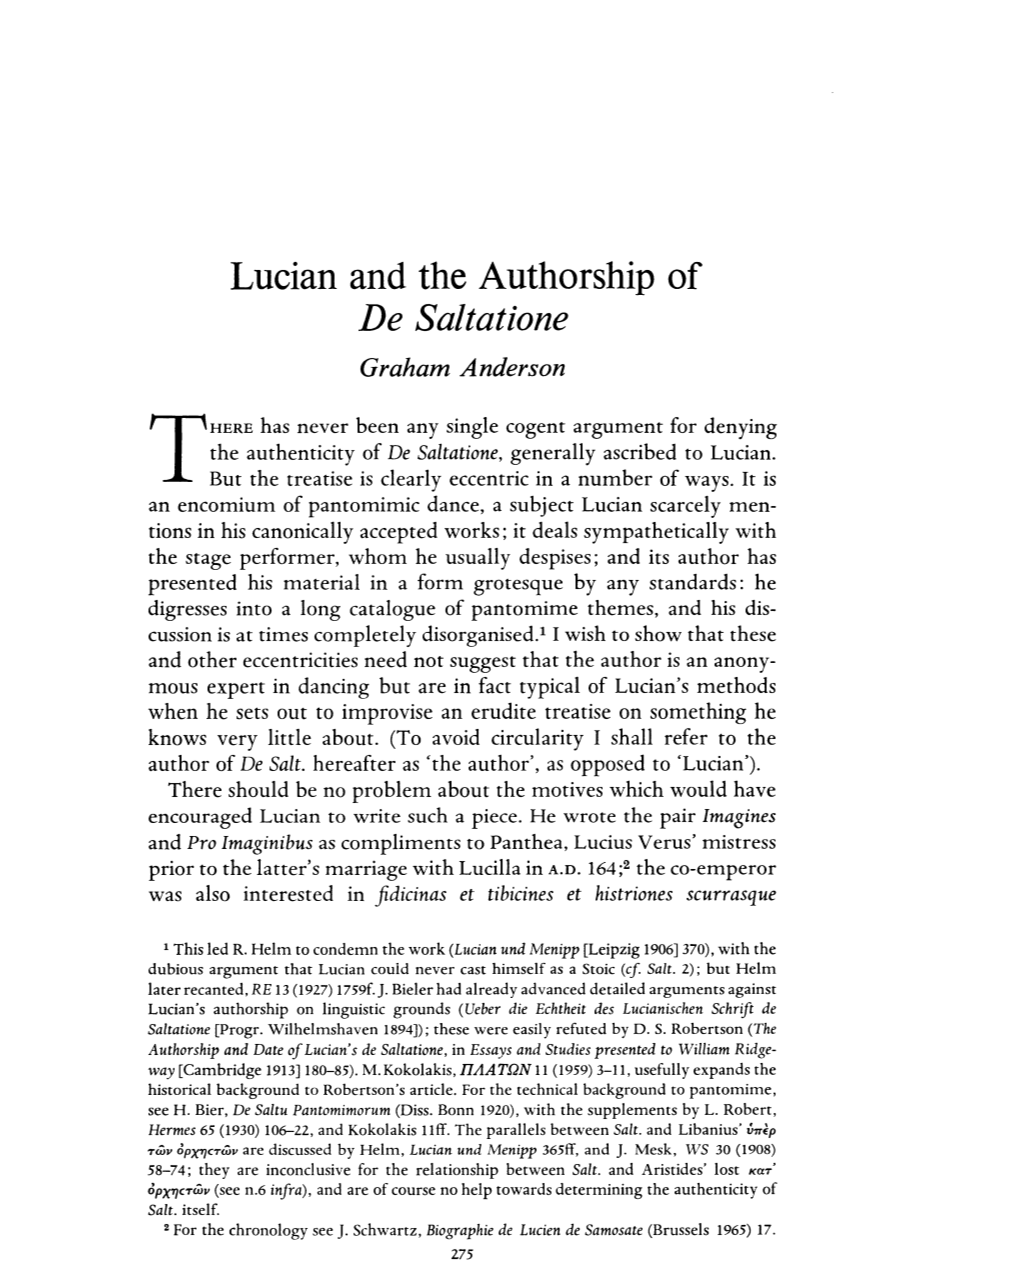 Lucian and the Authorship of "De Saltatione" Anderson, Graham Greek, Roman and Byzantine Studies; Fall 1977; 18, 3; Periodicals Archive Online Pg